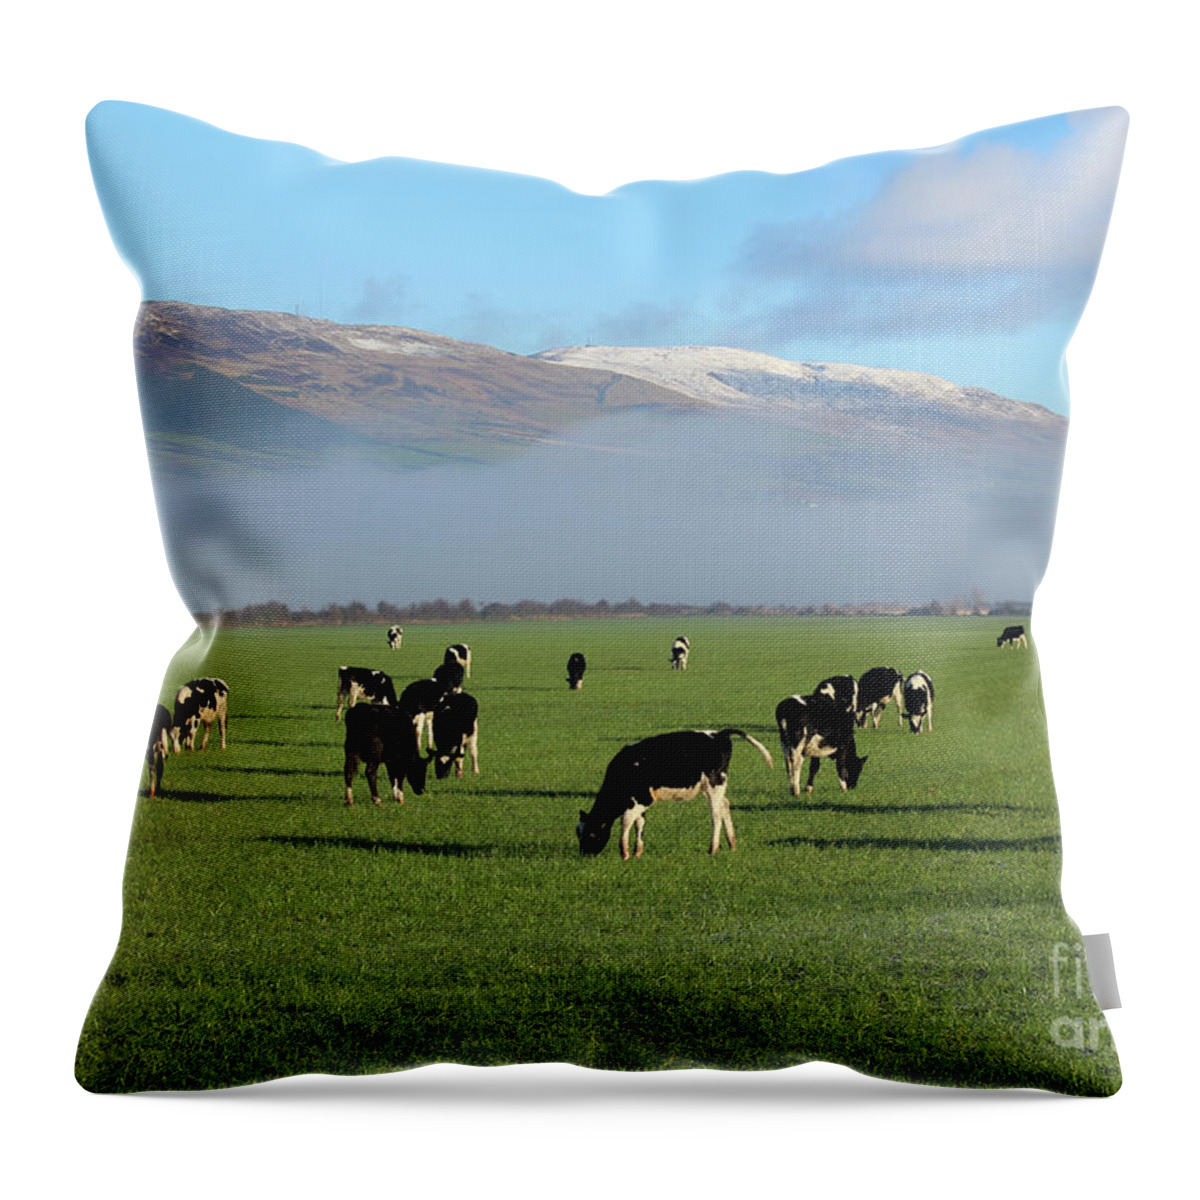 Donegal On Your Wall Throw Pillow featuring the photograph Morning Fog Donegal Ireland by Eddie Barron